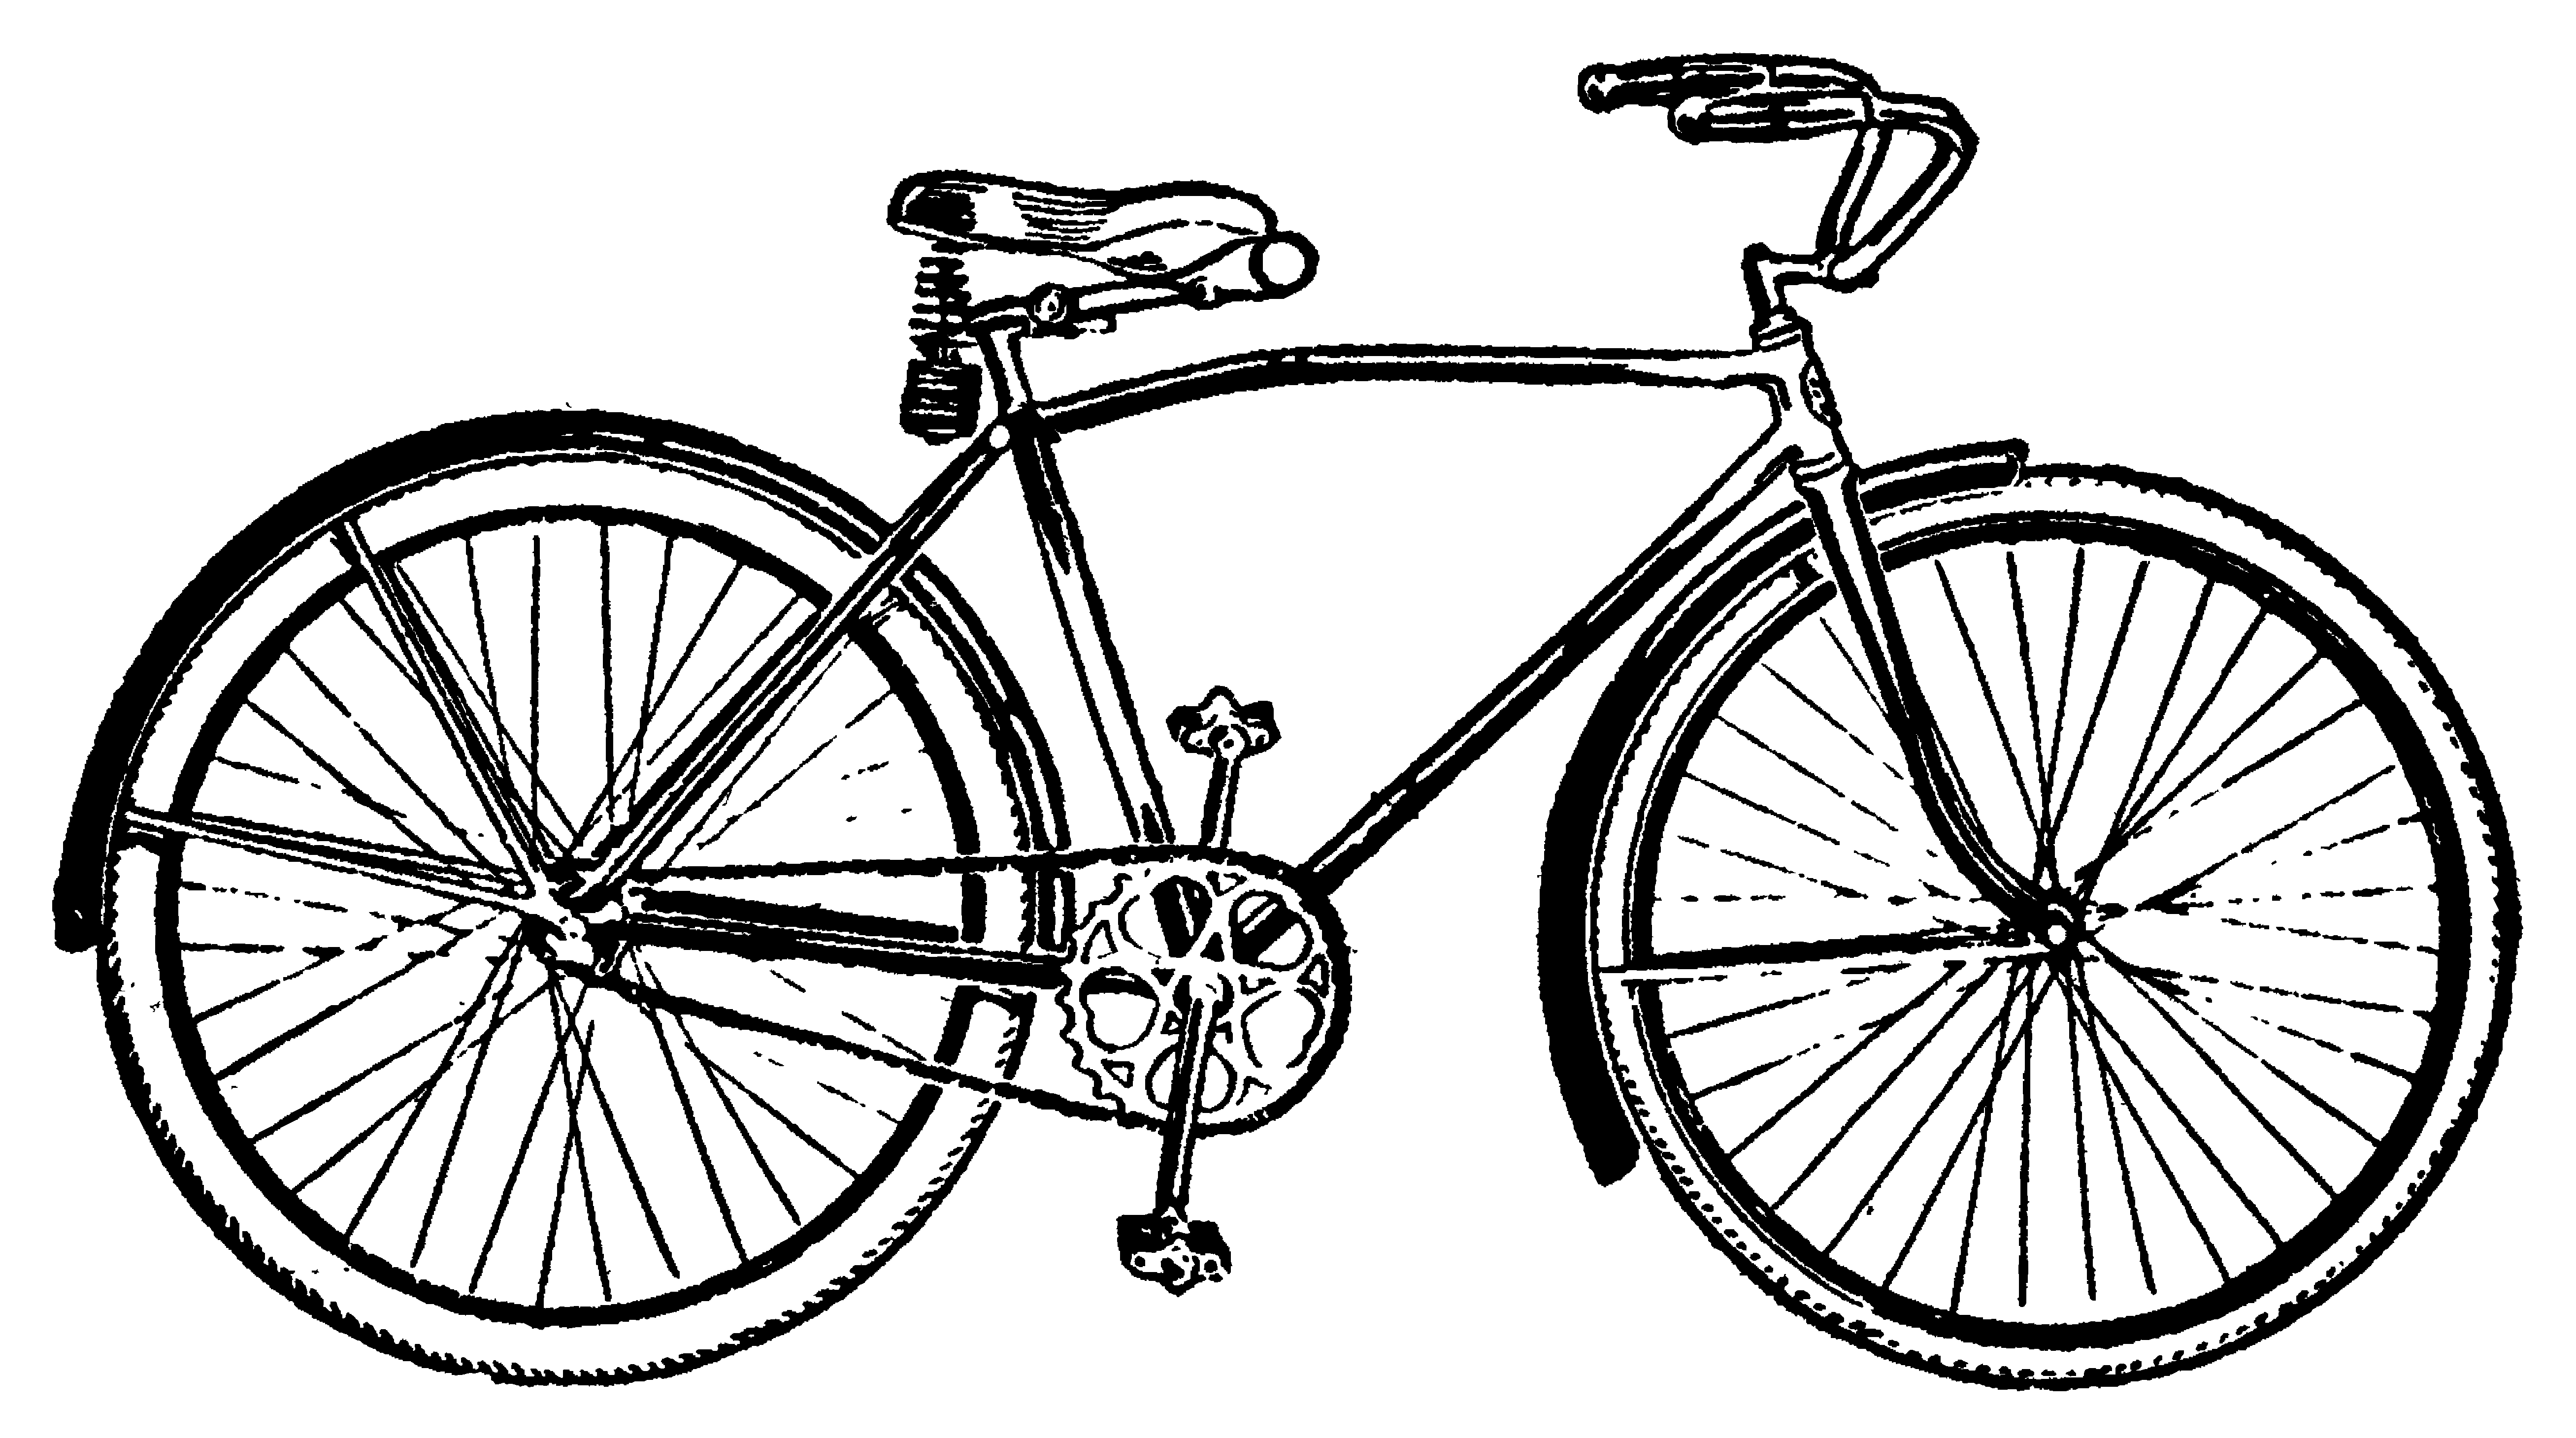 free vector clipart bicycle - photo #32